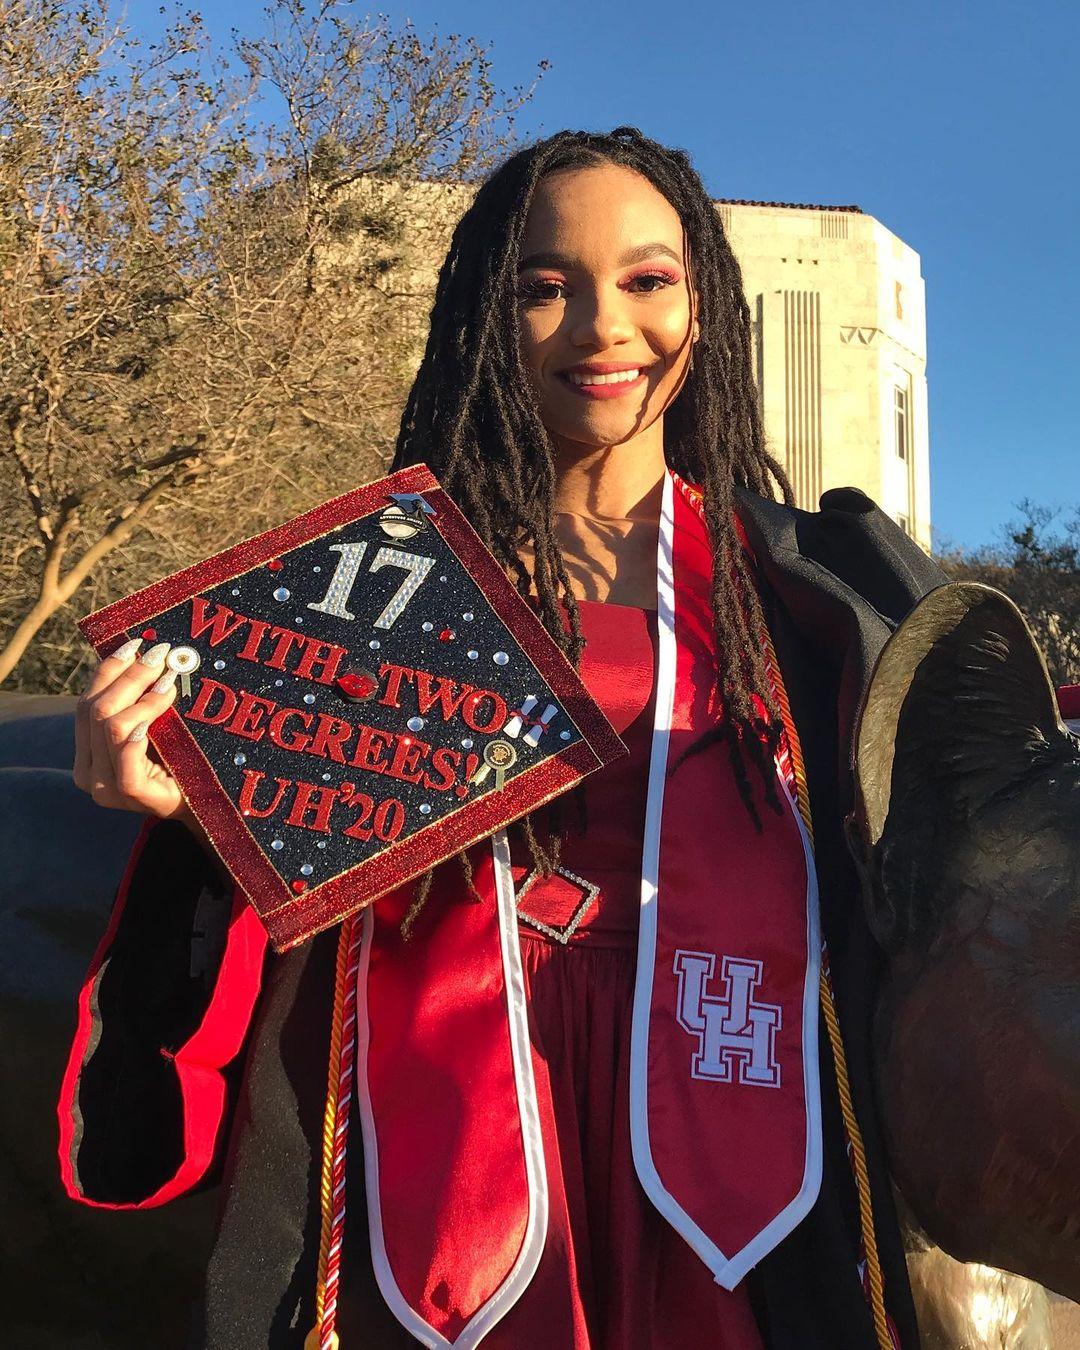 Just 17 years old, Salenah Cartier poses at her graduation from the University of Houston. (Courtesy of <a href="https://www.instagram.com/salenahcartier/">Salenah Cartier</a>)